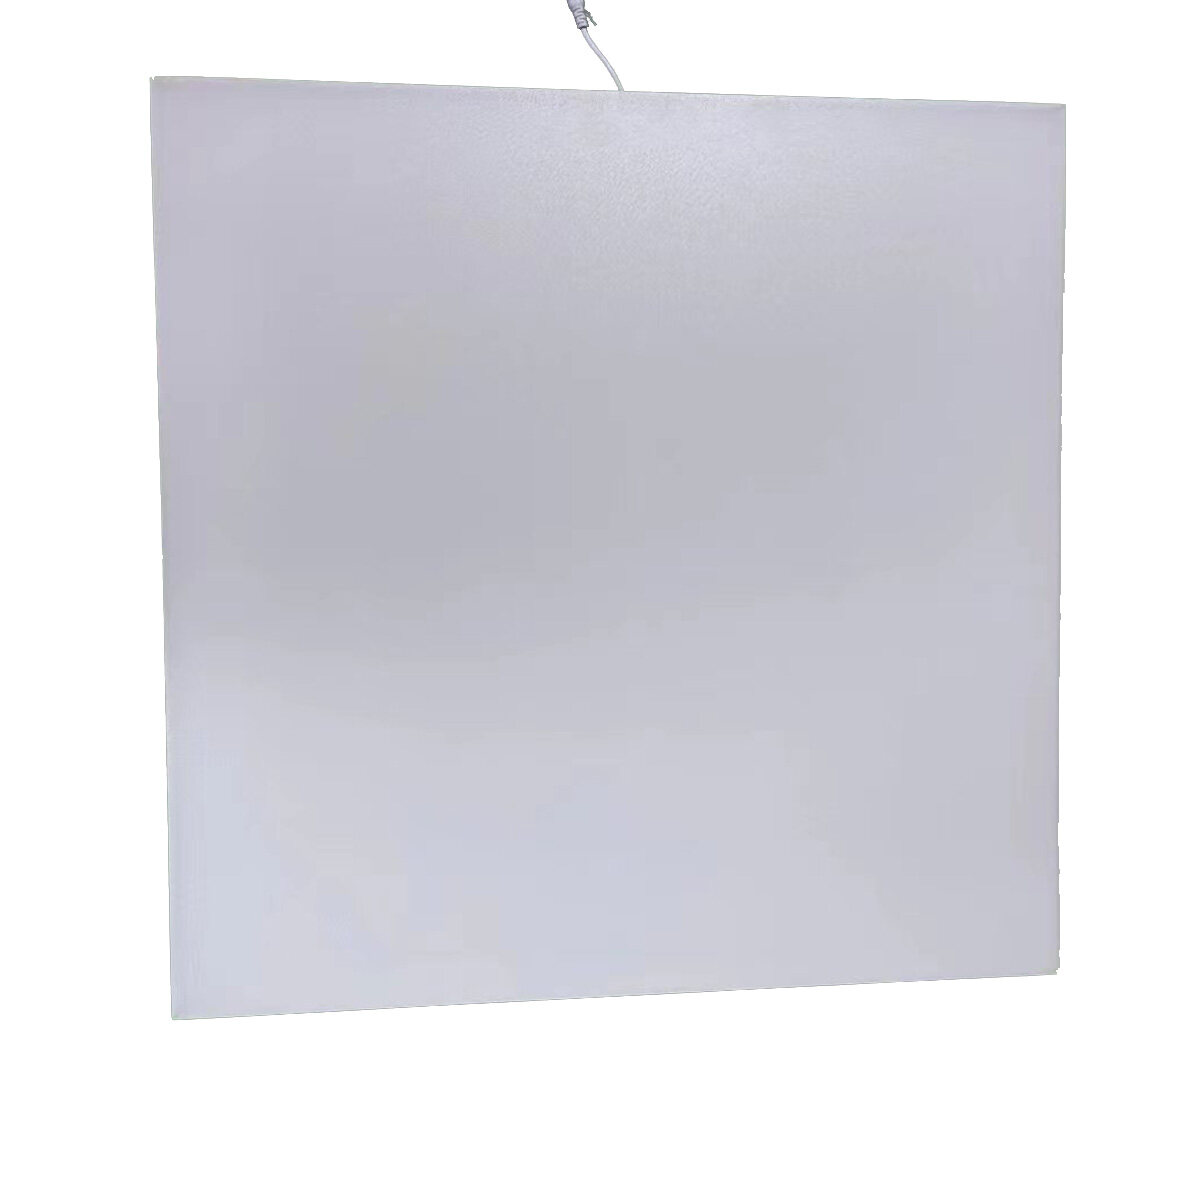 surface mounted modern led ceiling lights, surface mounted square led lights, oem led light manufacturer